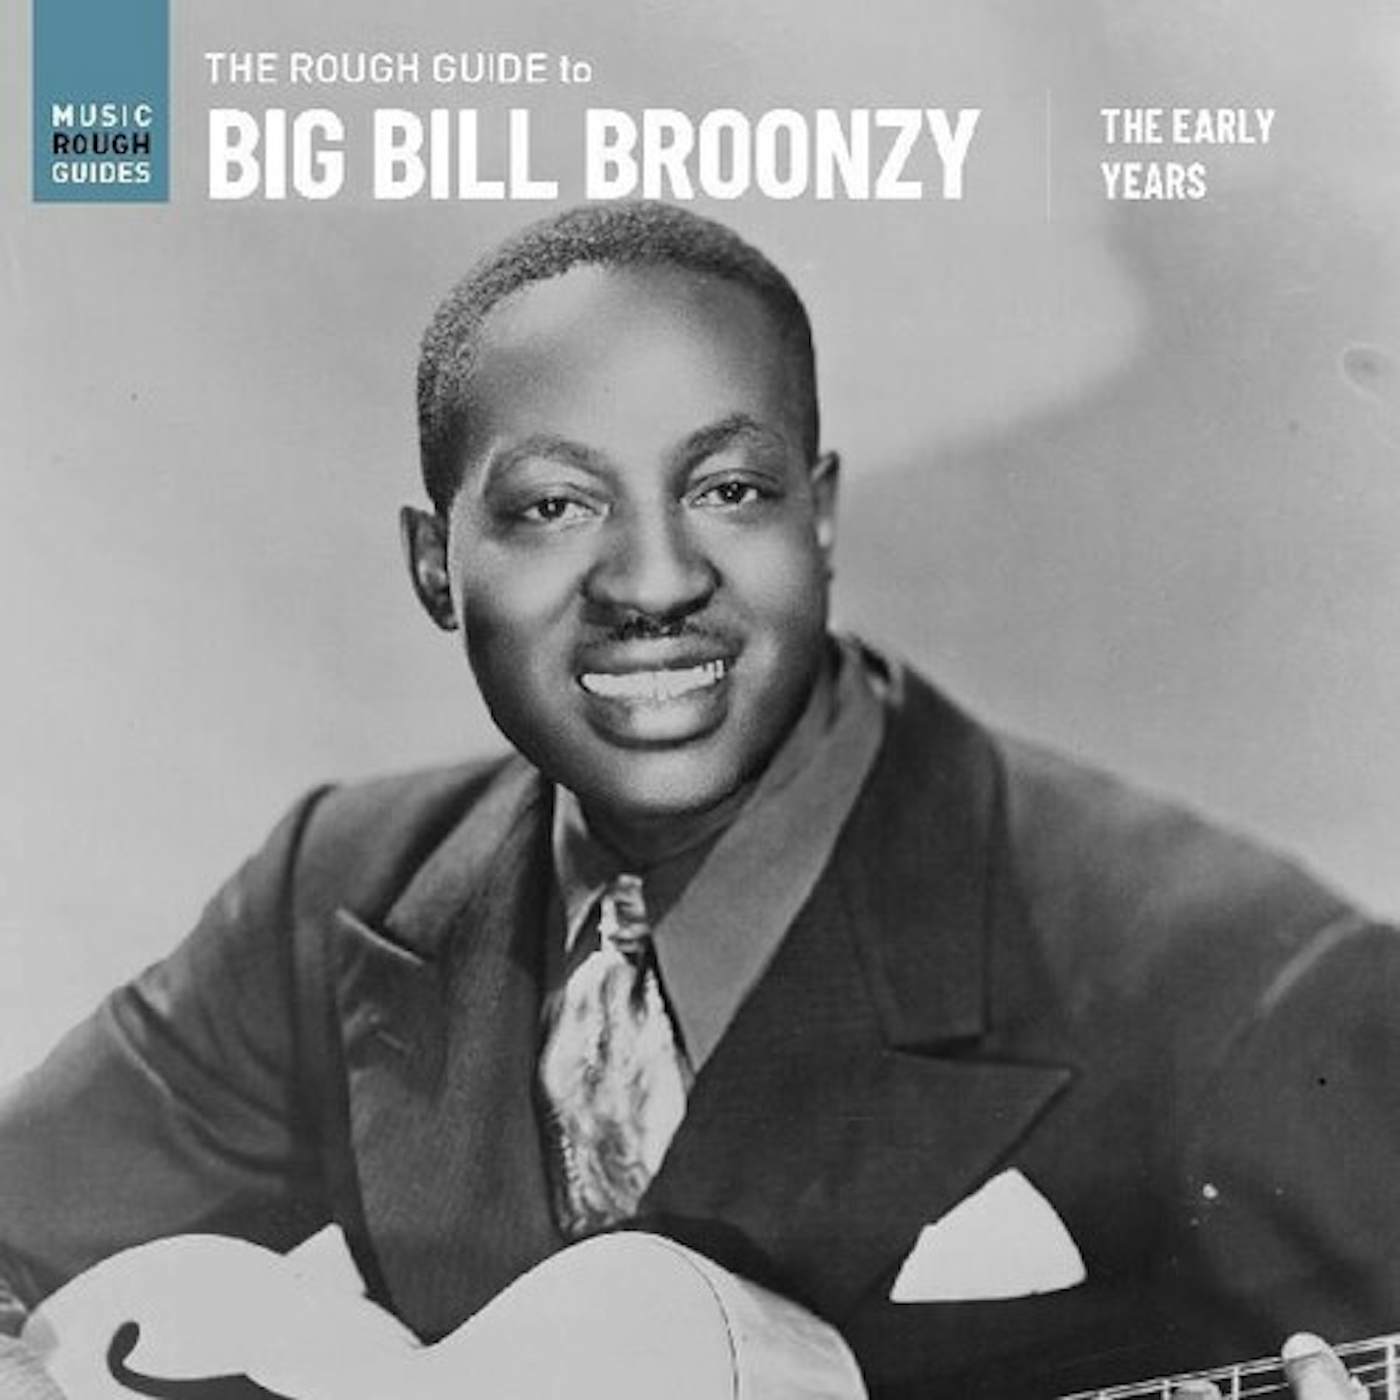 ROUGH GUIDE TO BIG BILL BROONZY: THE EARLY YEARS Vinyl Record